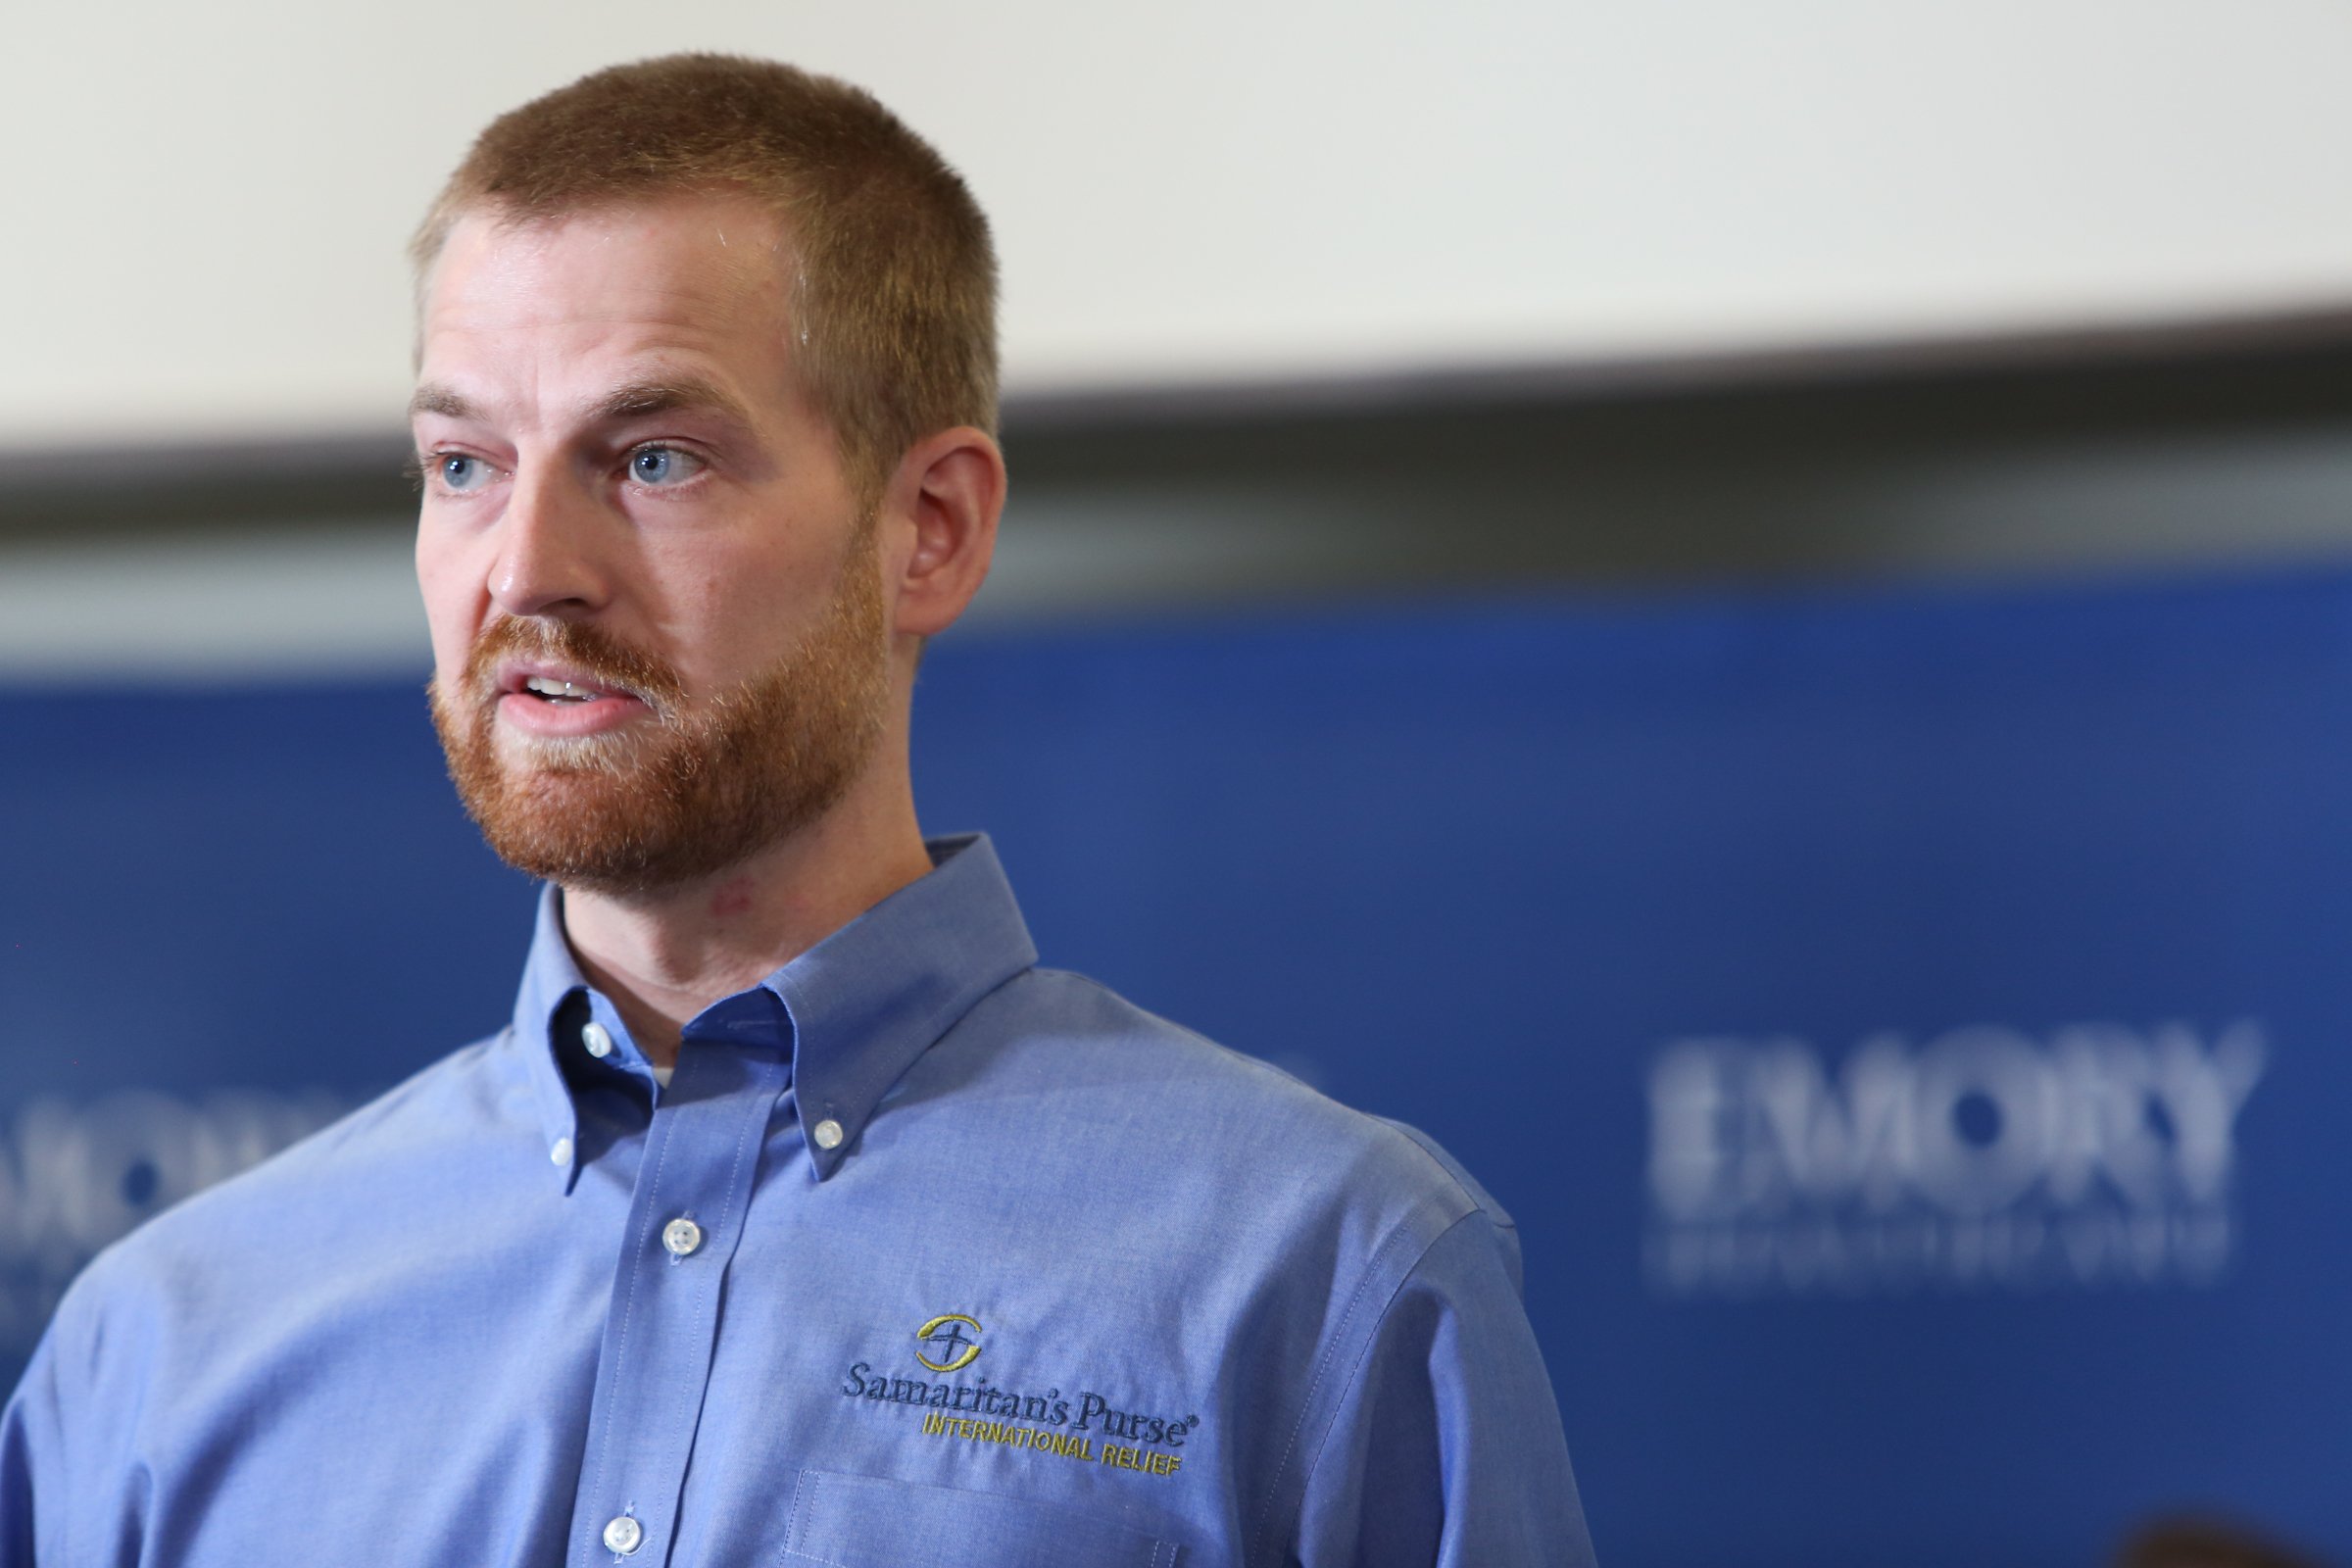 Dr. Kent Brantly speaks during a press conference announcing his release from Emory Hospital on Aug. 21, 2014 in Atlanta.